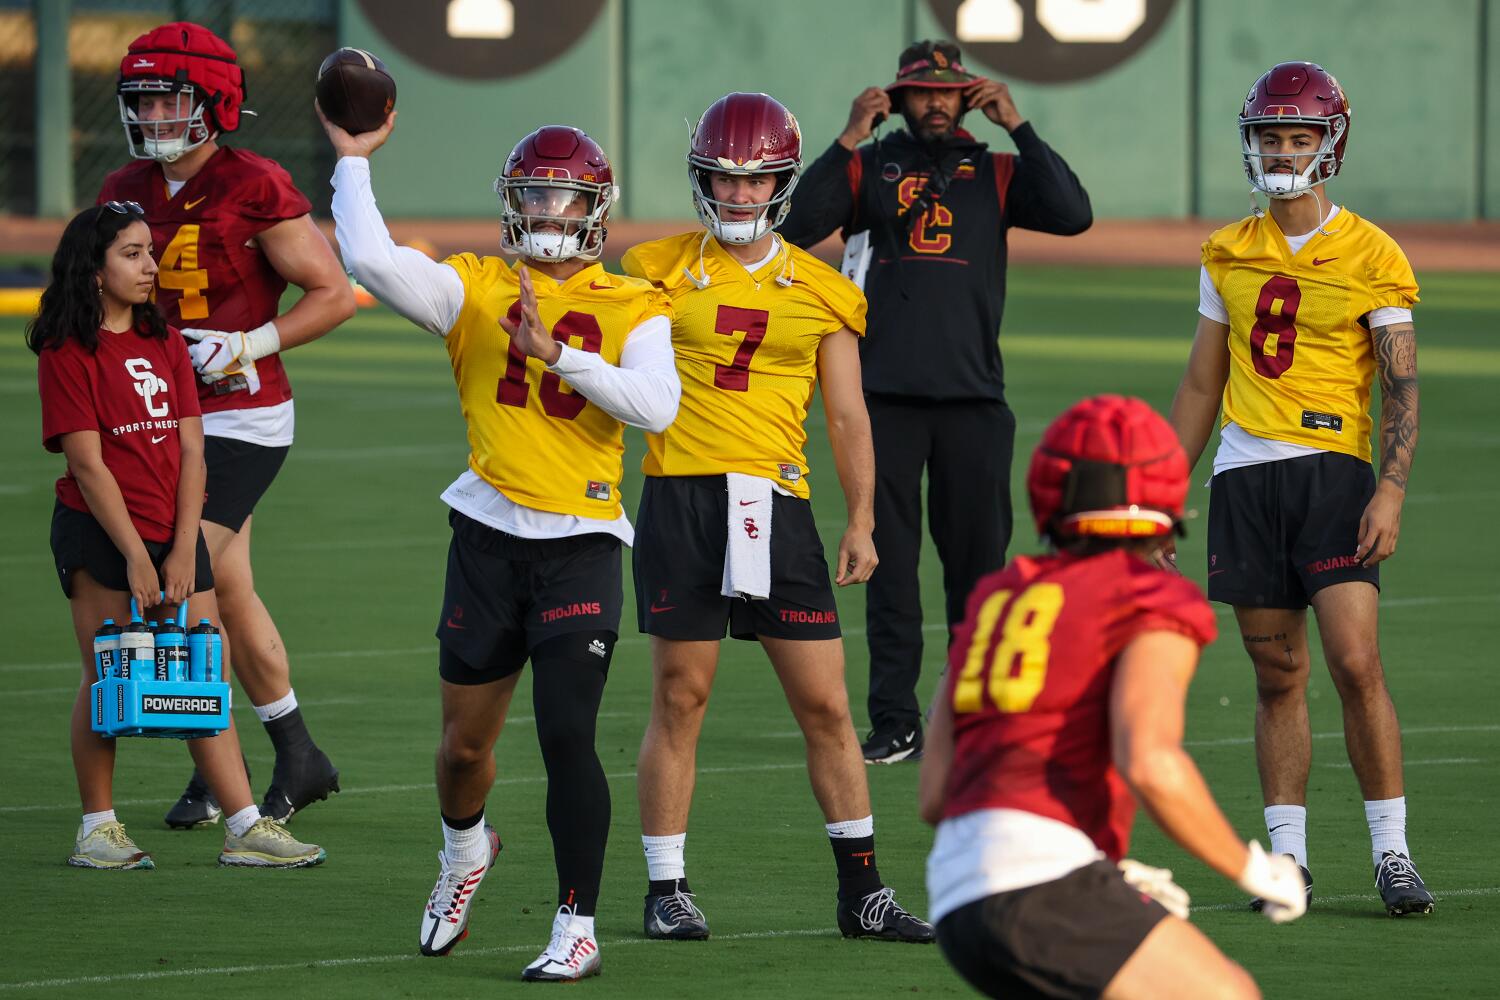 USC vs. San José State preview: Lincoln Riley's 'good players' ready to go